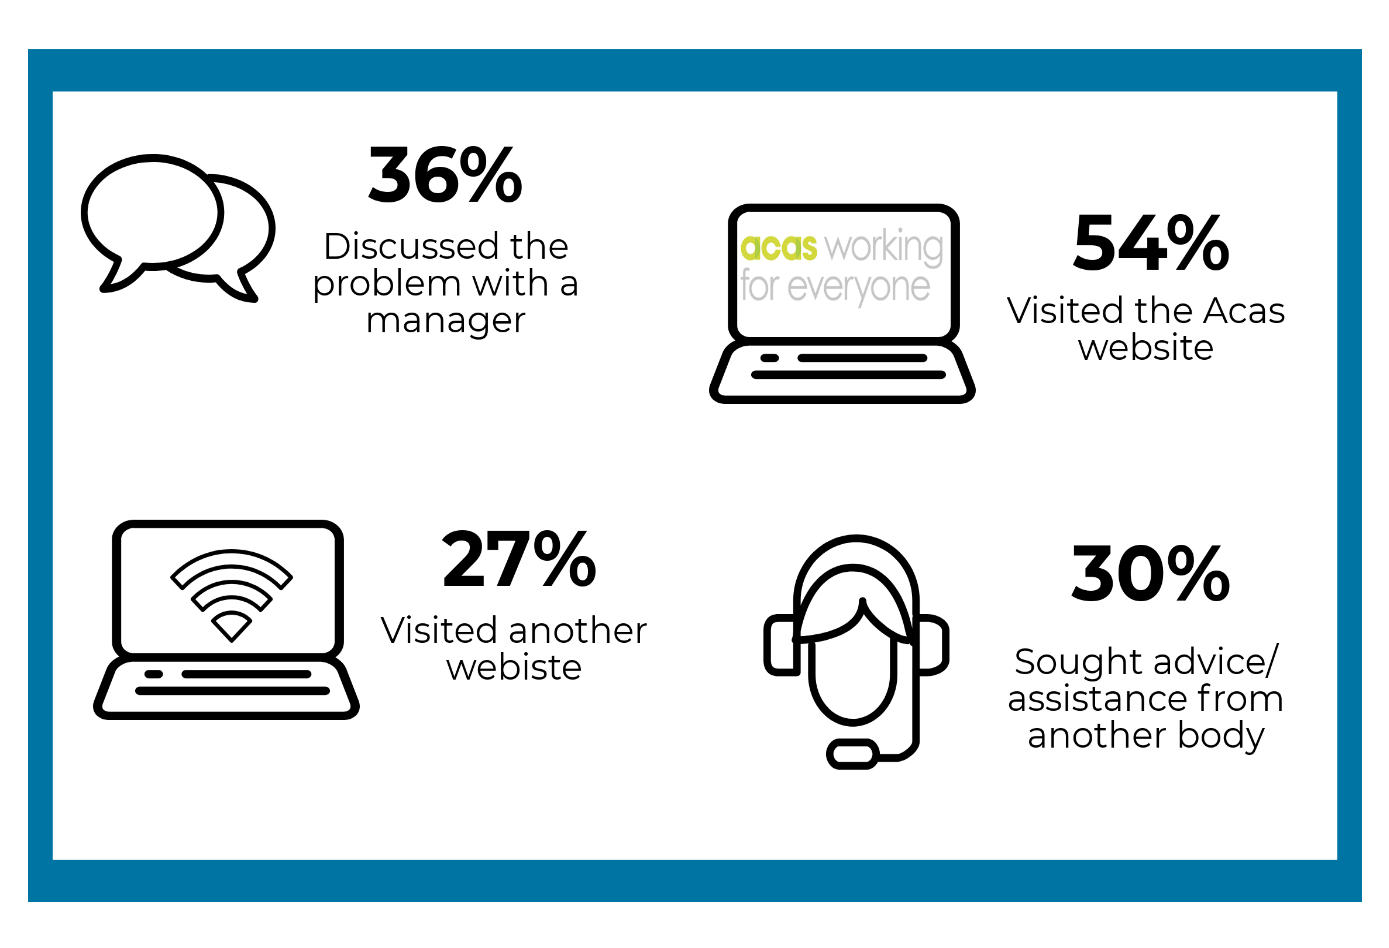 Before calling the helpline, 36% discussed the problem with a manager, 54% visited the Acas website, 27% visited another website, 30% sought advice and assistance from another body.